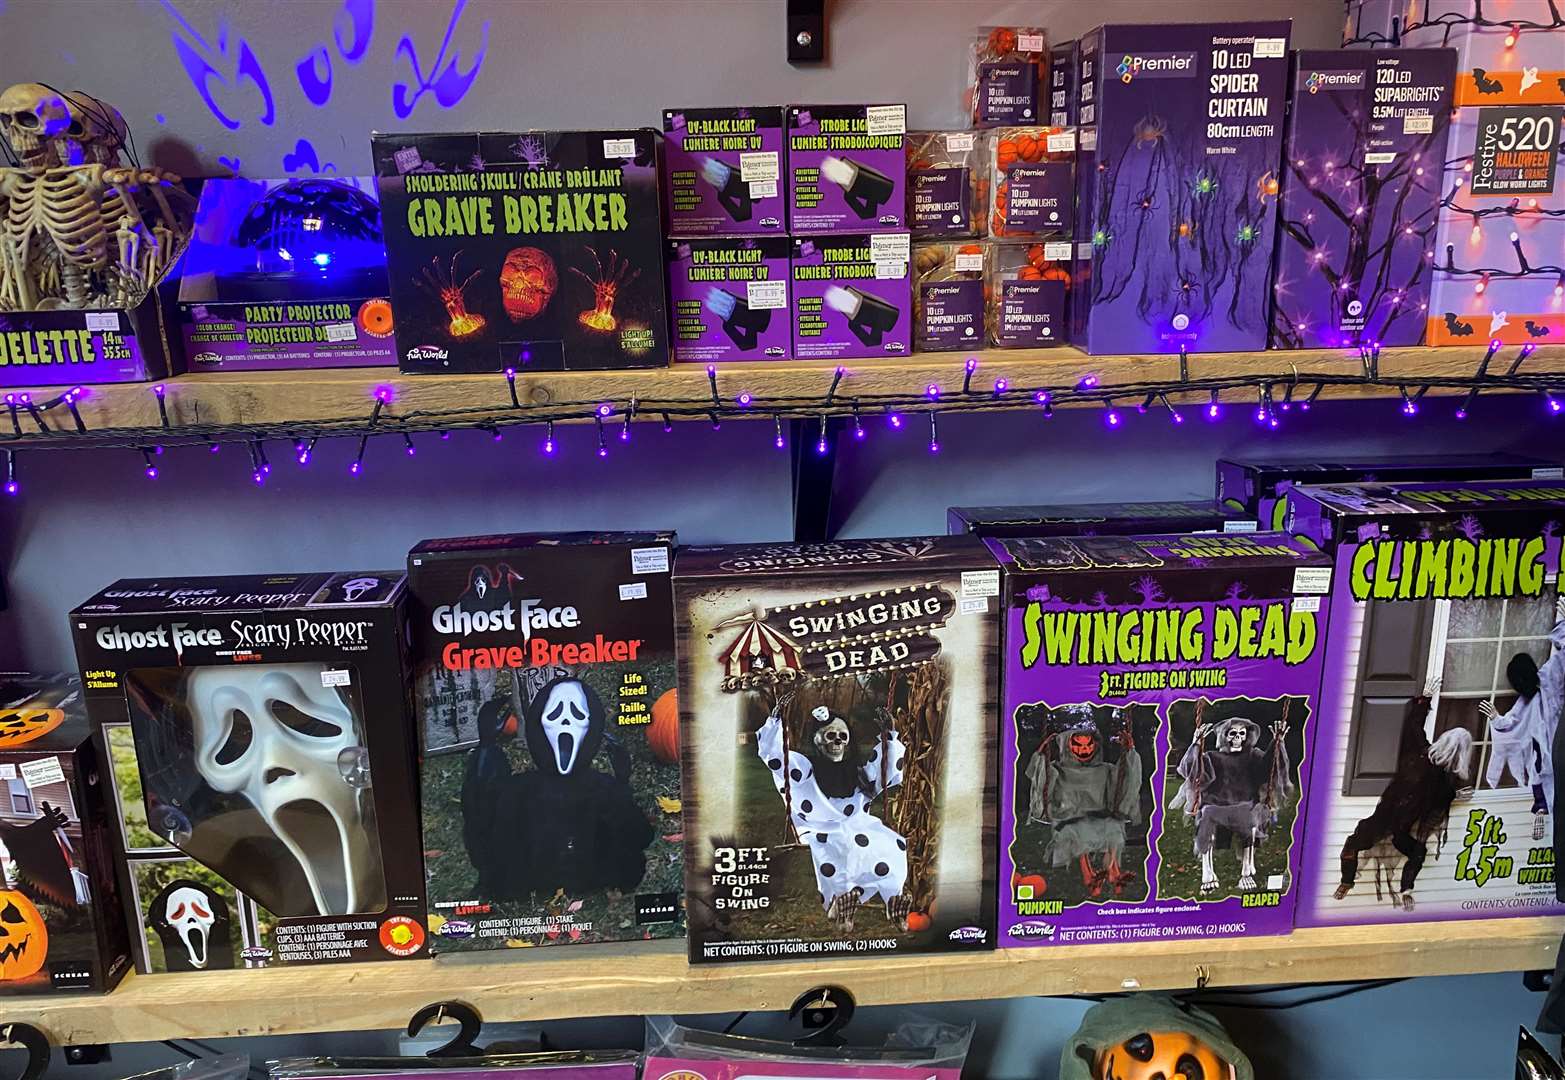 The spooky shop sells a variety of props, decorations and animatronics